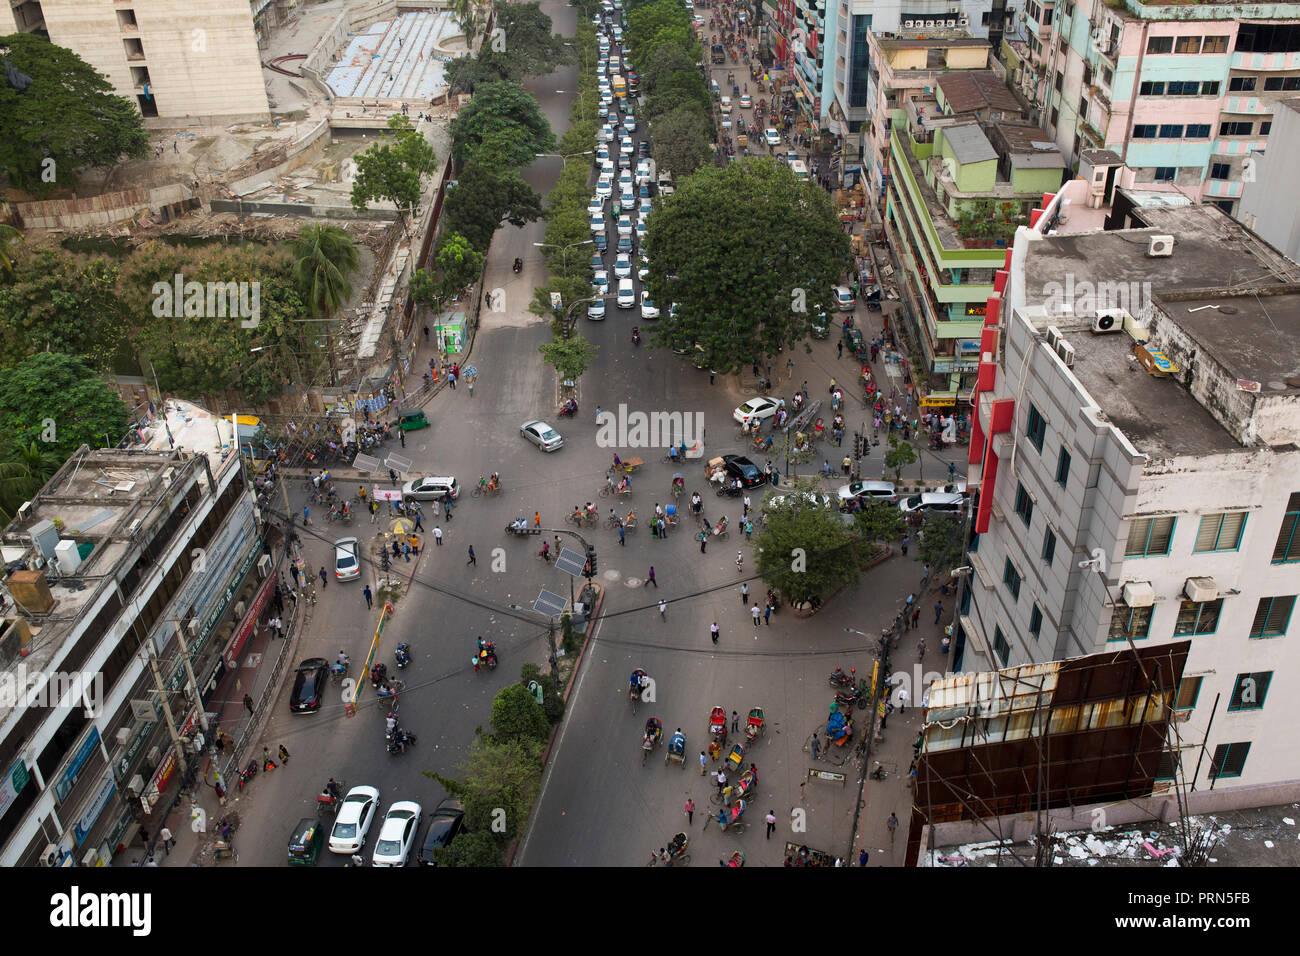 DHAKA, BANGLADESH - OCTOBER 03 : A general view of the Bangladeshi capital city Dhaka in Dhaka , Bangladesh on October 03, 2018. Dhaka is the main hub of economic activity in the country Bangladesh, generating a fifth of national GDP and nearly half of all formal jobs. Credit: zakir hossain chowdhury zakir/Alamy Live News Stock Photo